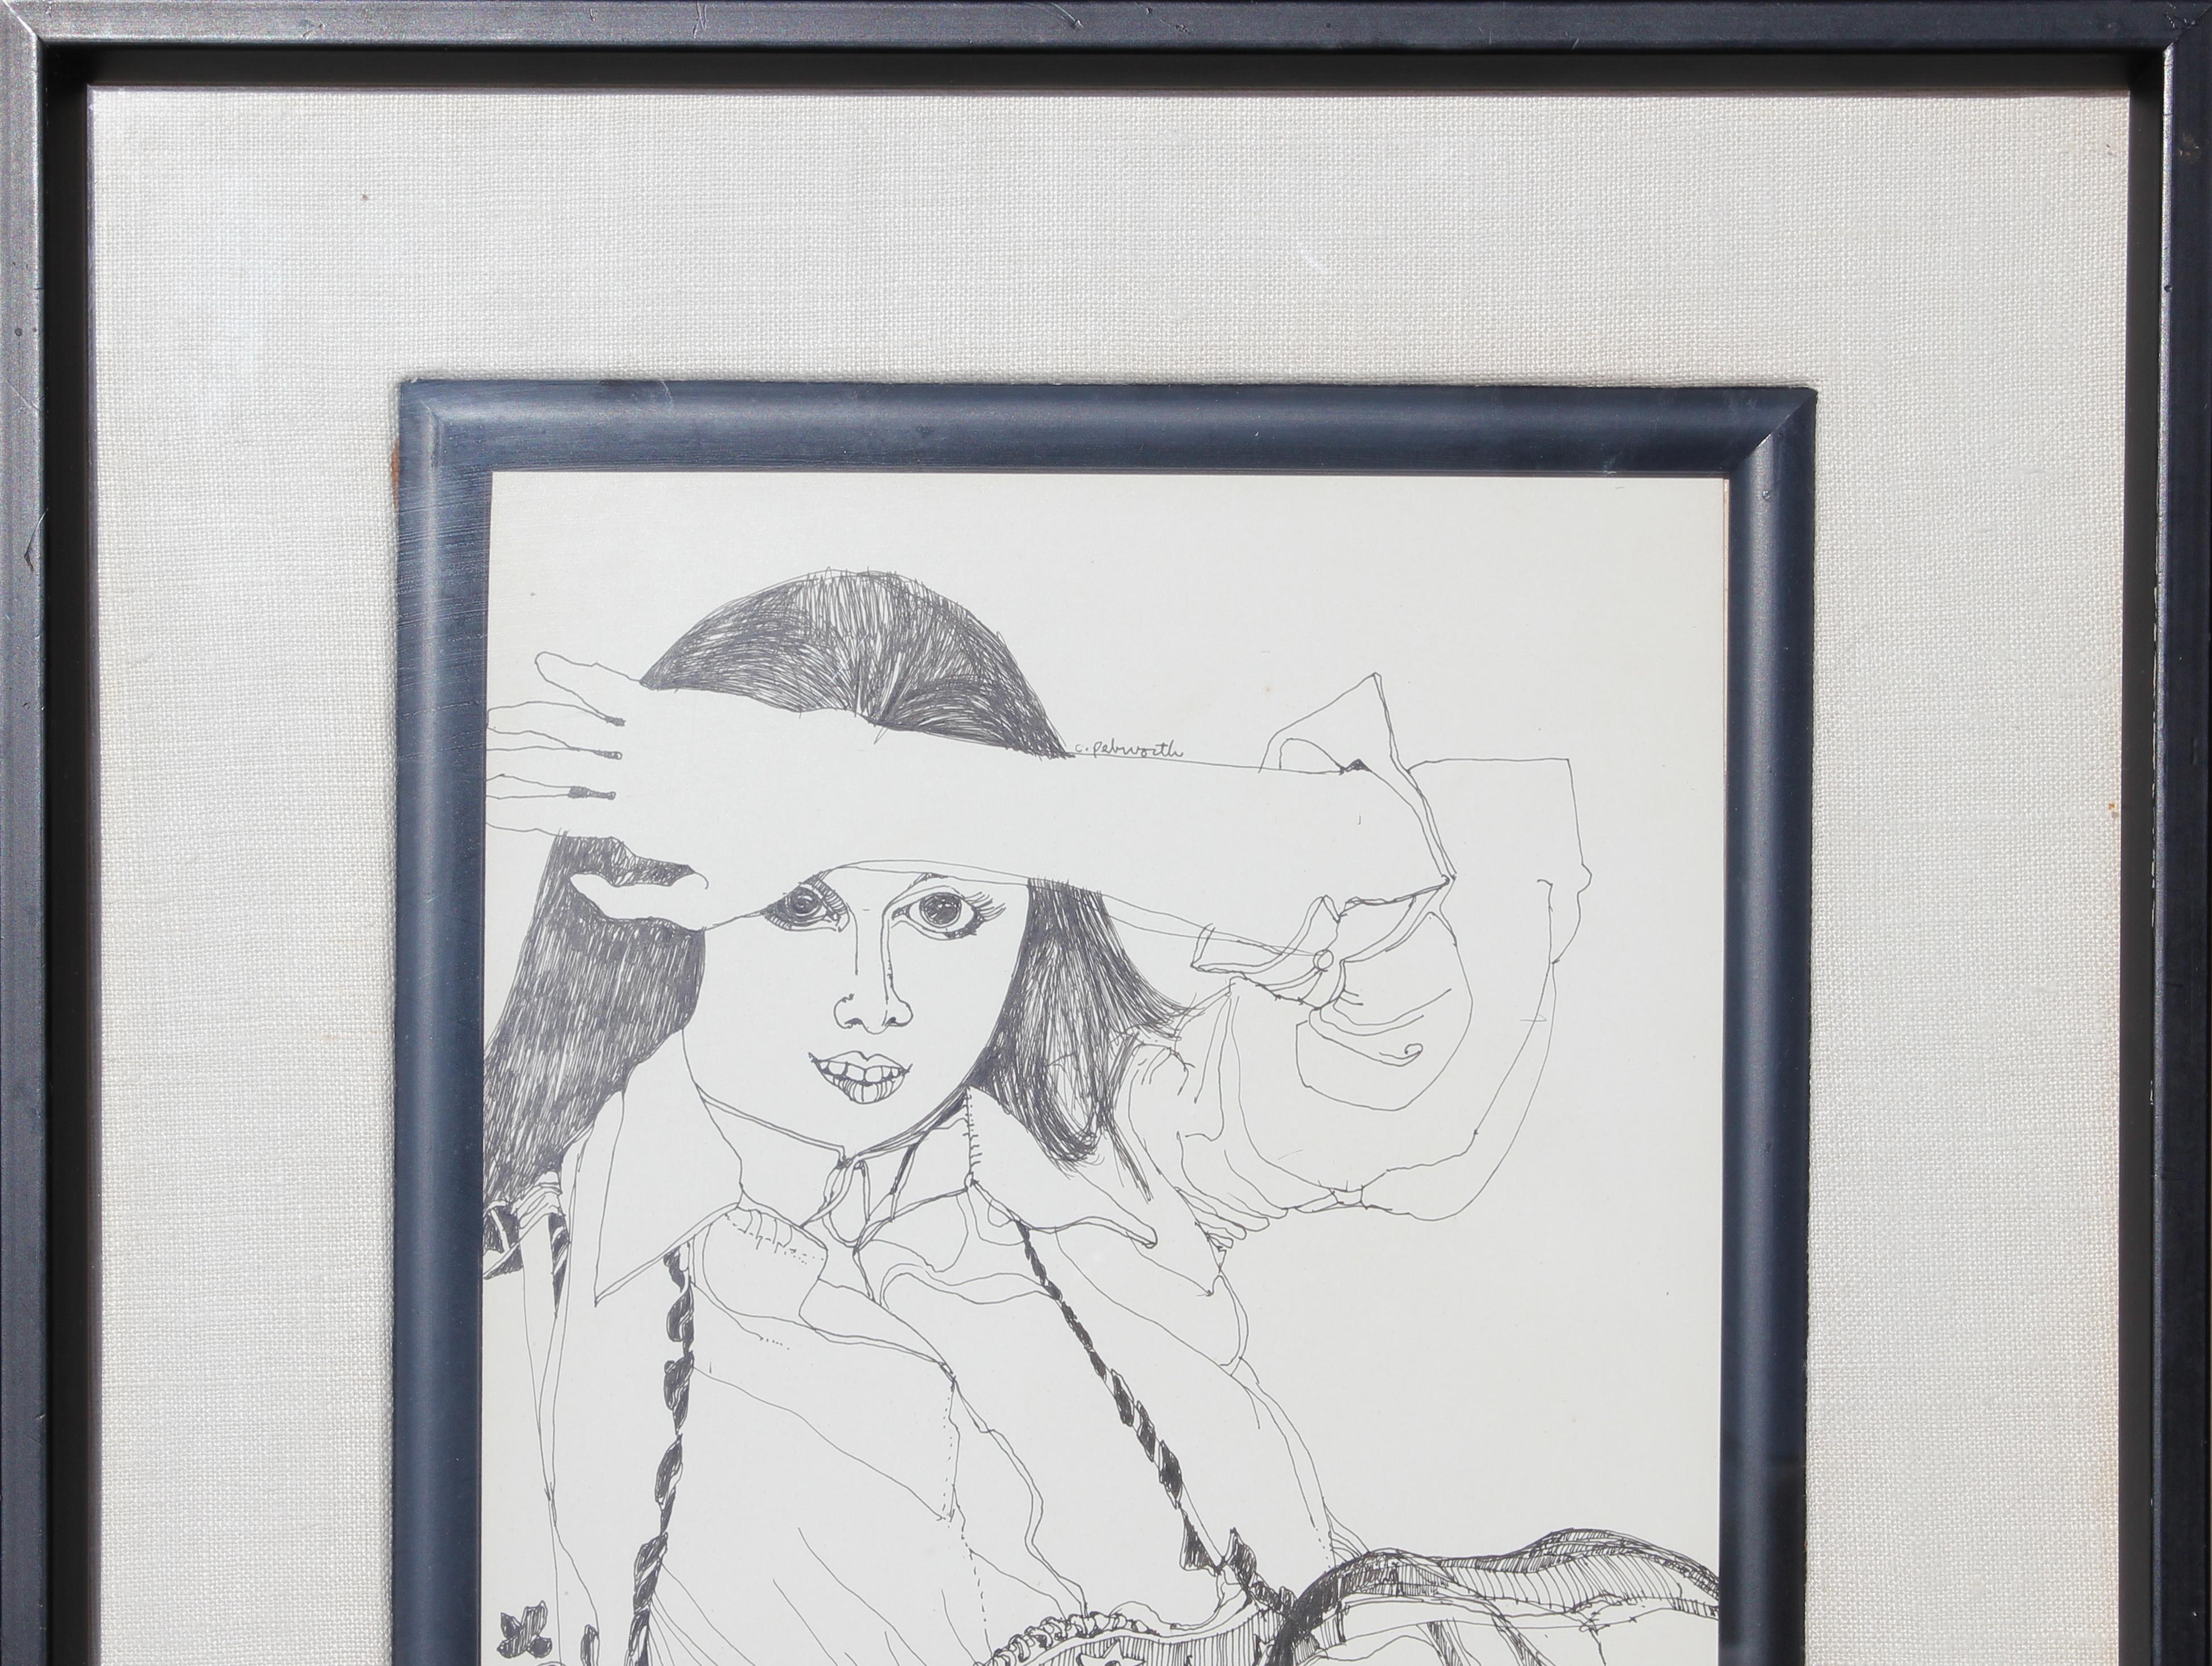 Original black and white modern ink portrait of a woman holding her arm above her head. Hung in a complimentary two-toned frame with original Dubose Gallery information on the back.

Dimensions Without Frame: H 9.5 in. x W 7.5 in.

Artist Biography: